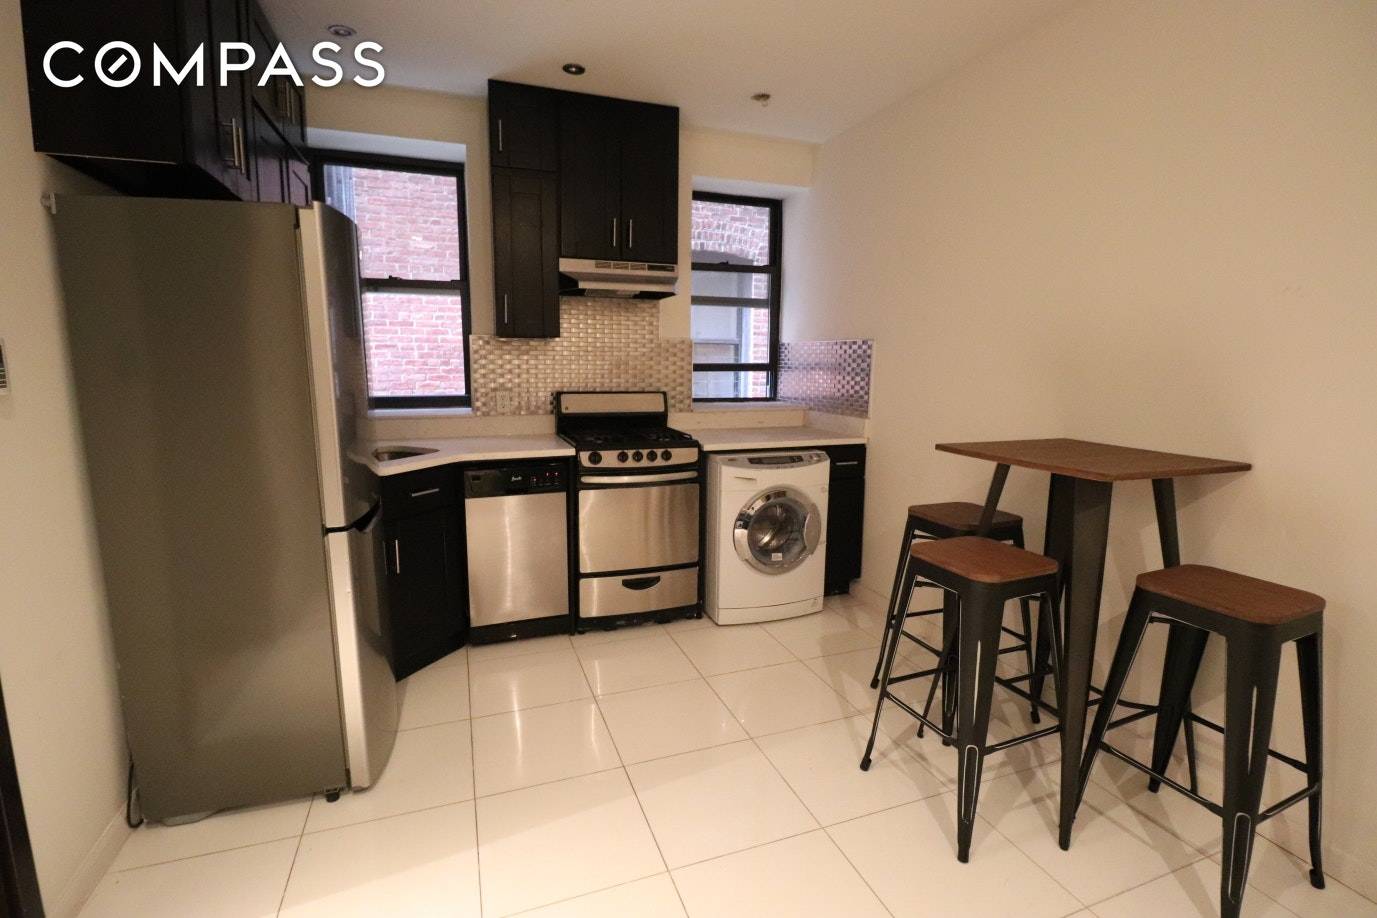 Spectacular 3 Bedroom Great Price amp ; Location Walking distance to Columbia Gut renovated featuring brand new hardwood floors, granite counter tops, custom kitchen cabinets, ceramic bathrooms, new light fixtures ...